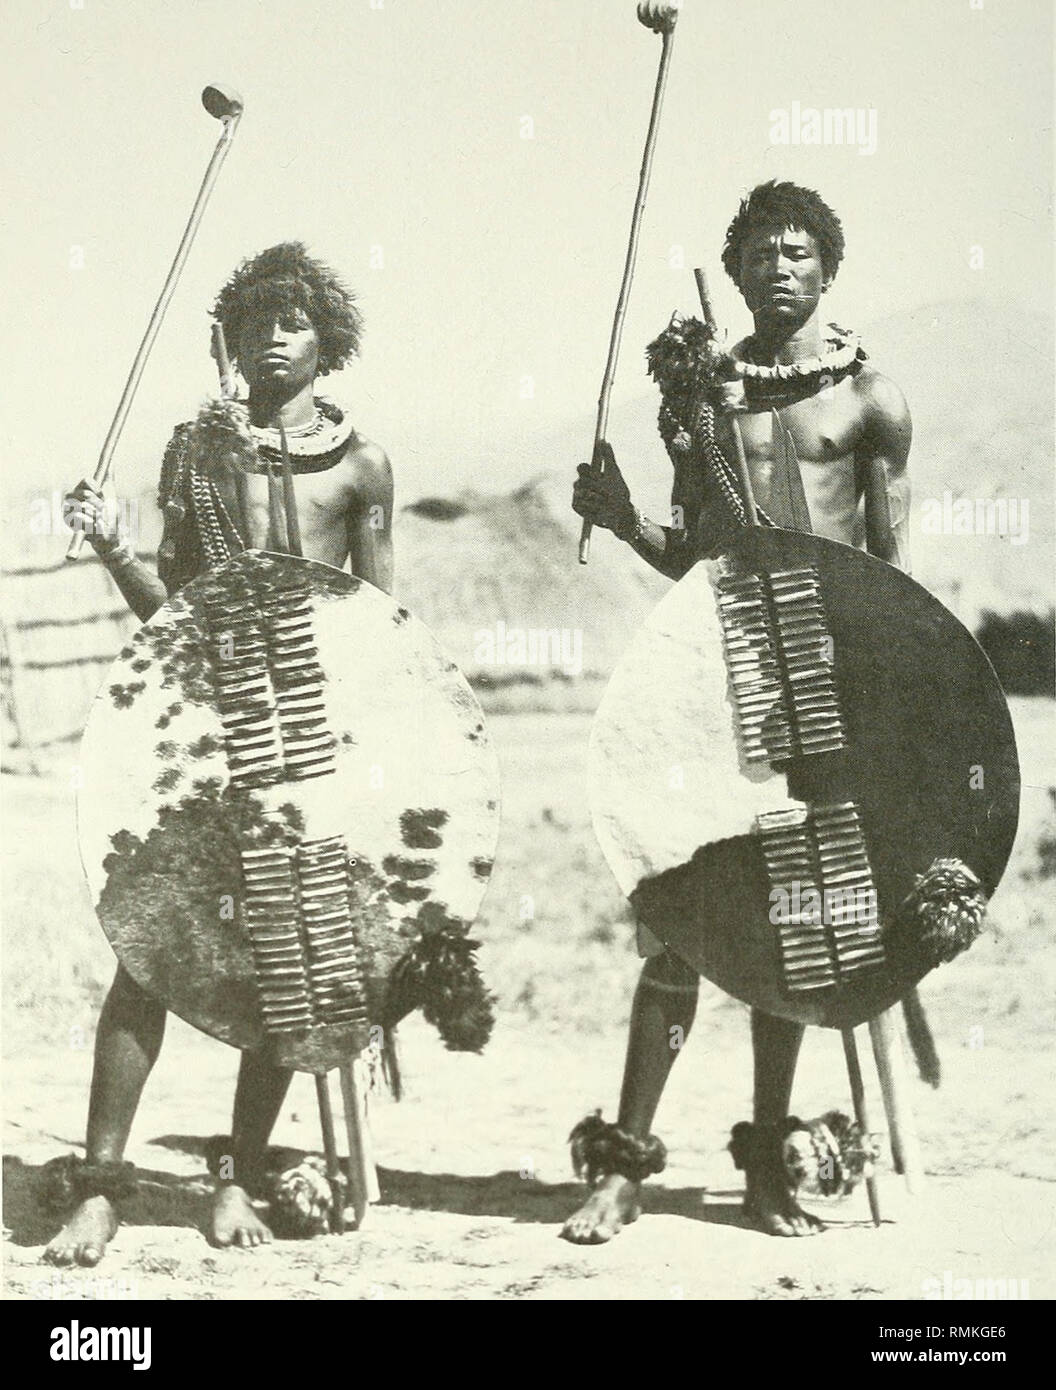 . Annals of the South African Museum = Annale van die Suid-Afrikaanse Museum. Natural history. 382 ANNALS OF THE SOUTH AFRICAN MUSEUM. Fig. 48. Swazi men with war shields. (Duggan-Cronin collection, McGregor Museum.) MUSICAL INSTRUMENTS Terms: luveve—whistle; itambula—drum (Kirbv 1934: 25. 112); mandzawe—drum (Marwick 1940: 82). A piece of smooth goatskin, held over the mouth of a clay pot by the drum- mer or an assistant, formed the head of a drum that was used at ceremonies or divinations; this type of drum was beaten with a reed. Itambula (possibly derived from the Portuguese word tambula)  Stock Photo